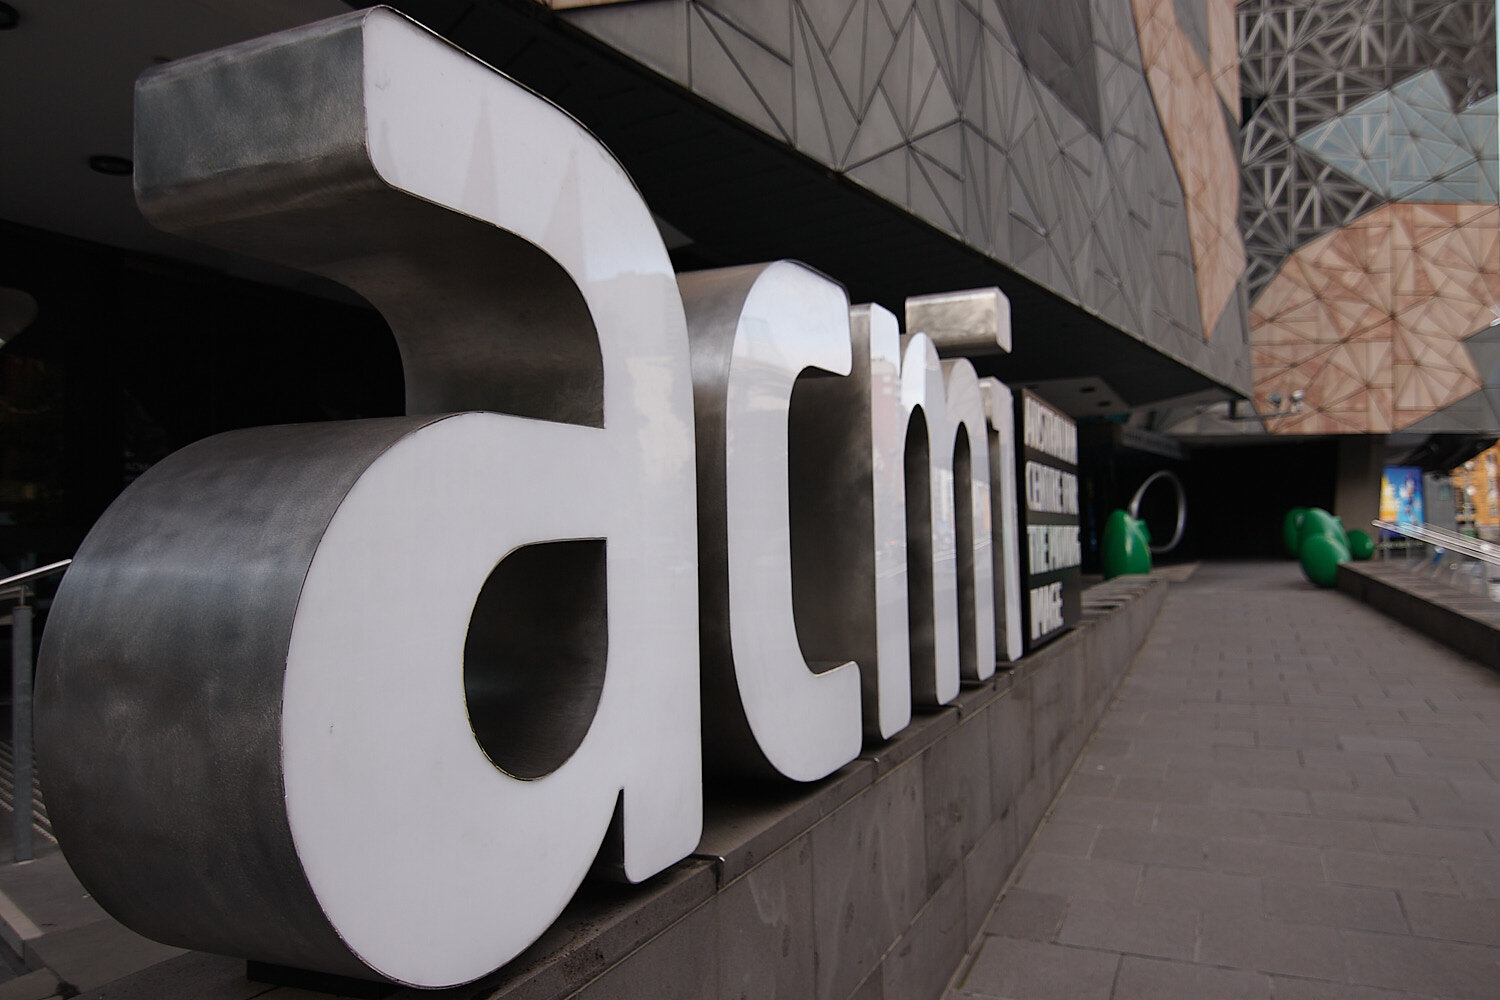 Australian Centre for the Moving Image - ACMI